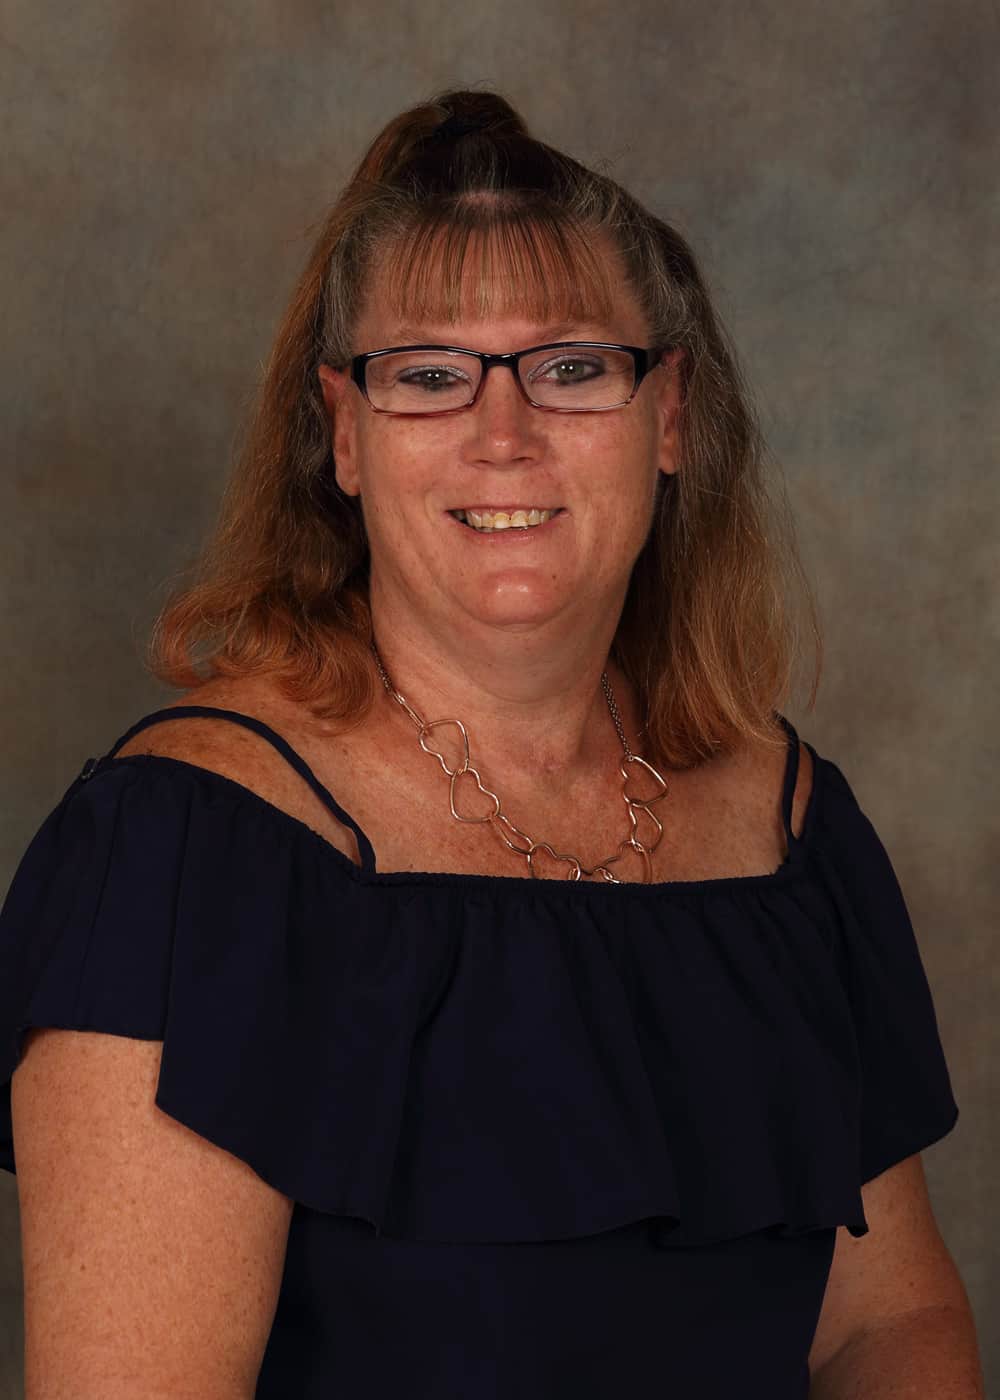 Photo of Lead Teacher Candi Heitkam. She is a Caucasian woman with long brown hair, dark-framed glasses and blue eyes. She is smiling and wears a gold necklace made from interlaced hearts and a navy blue dress.